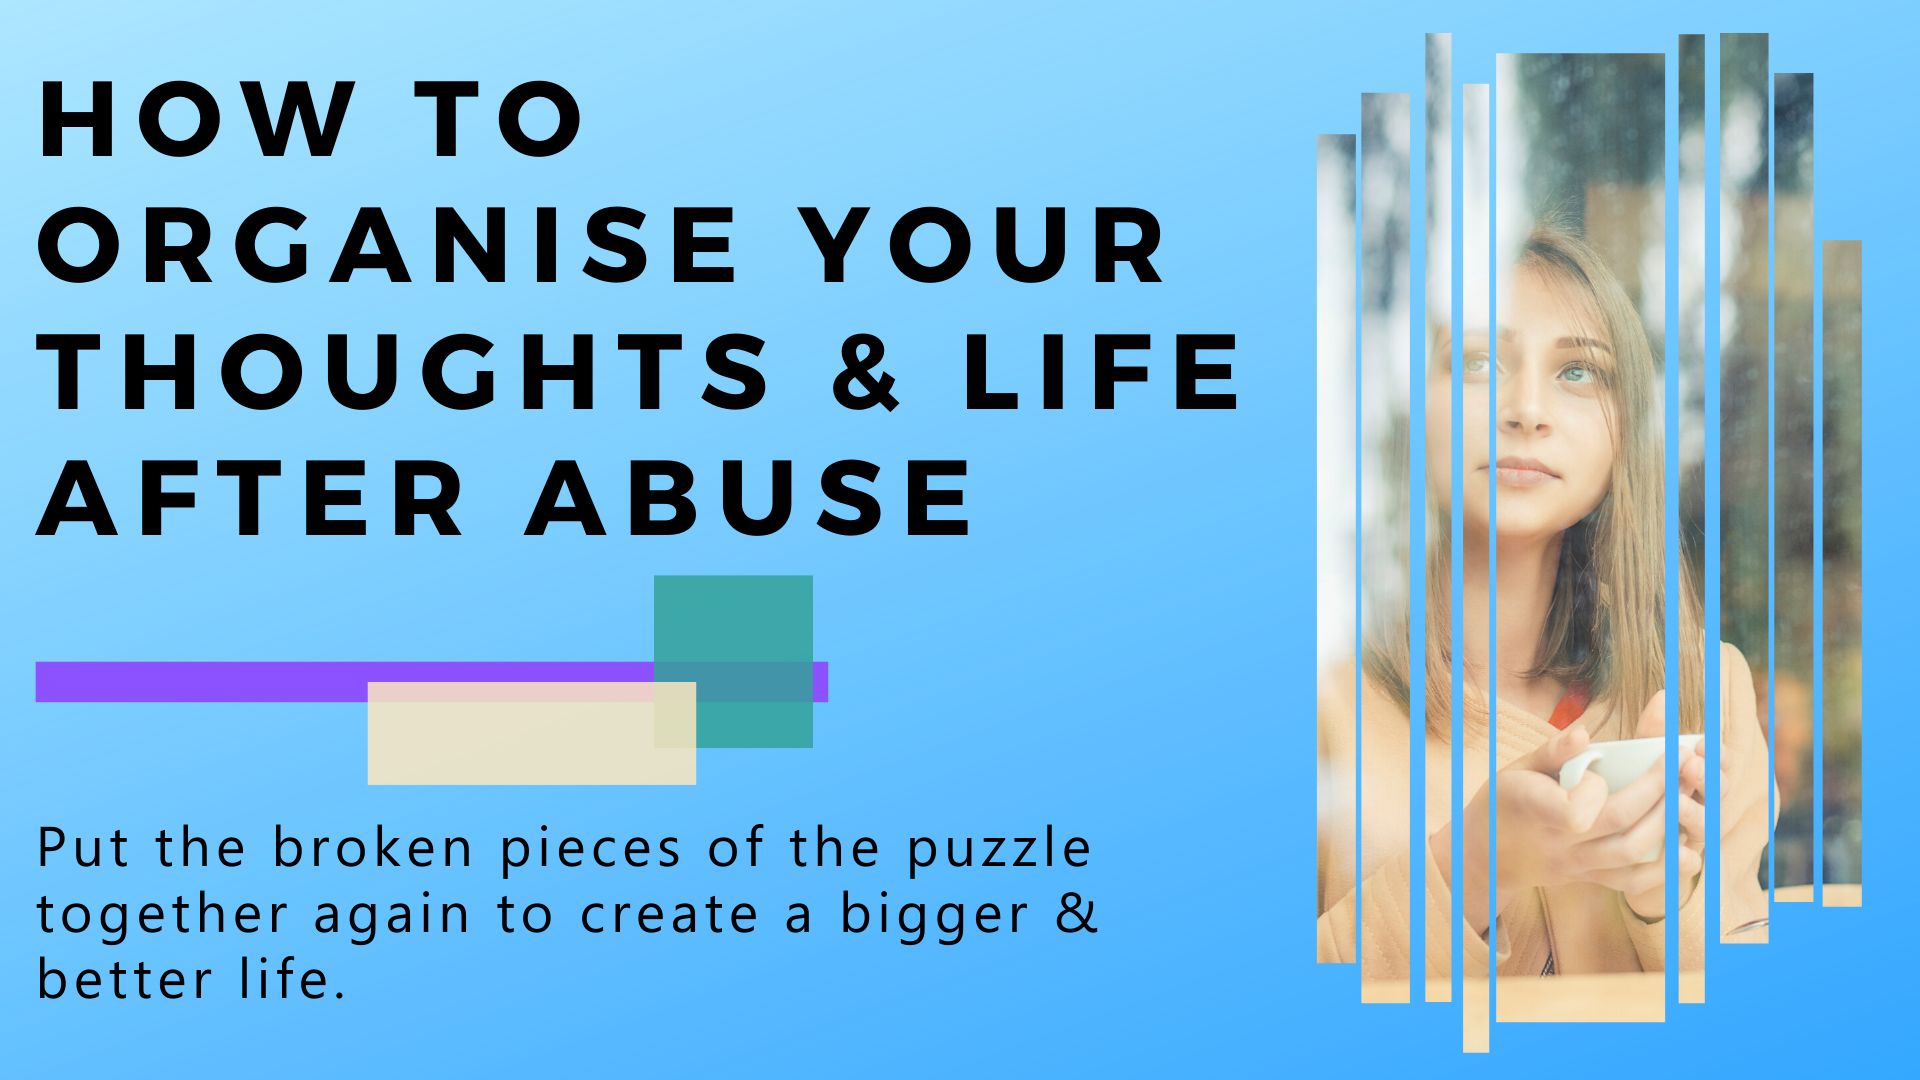 How To Organise Your Thoughts & Life After Abuse